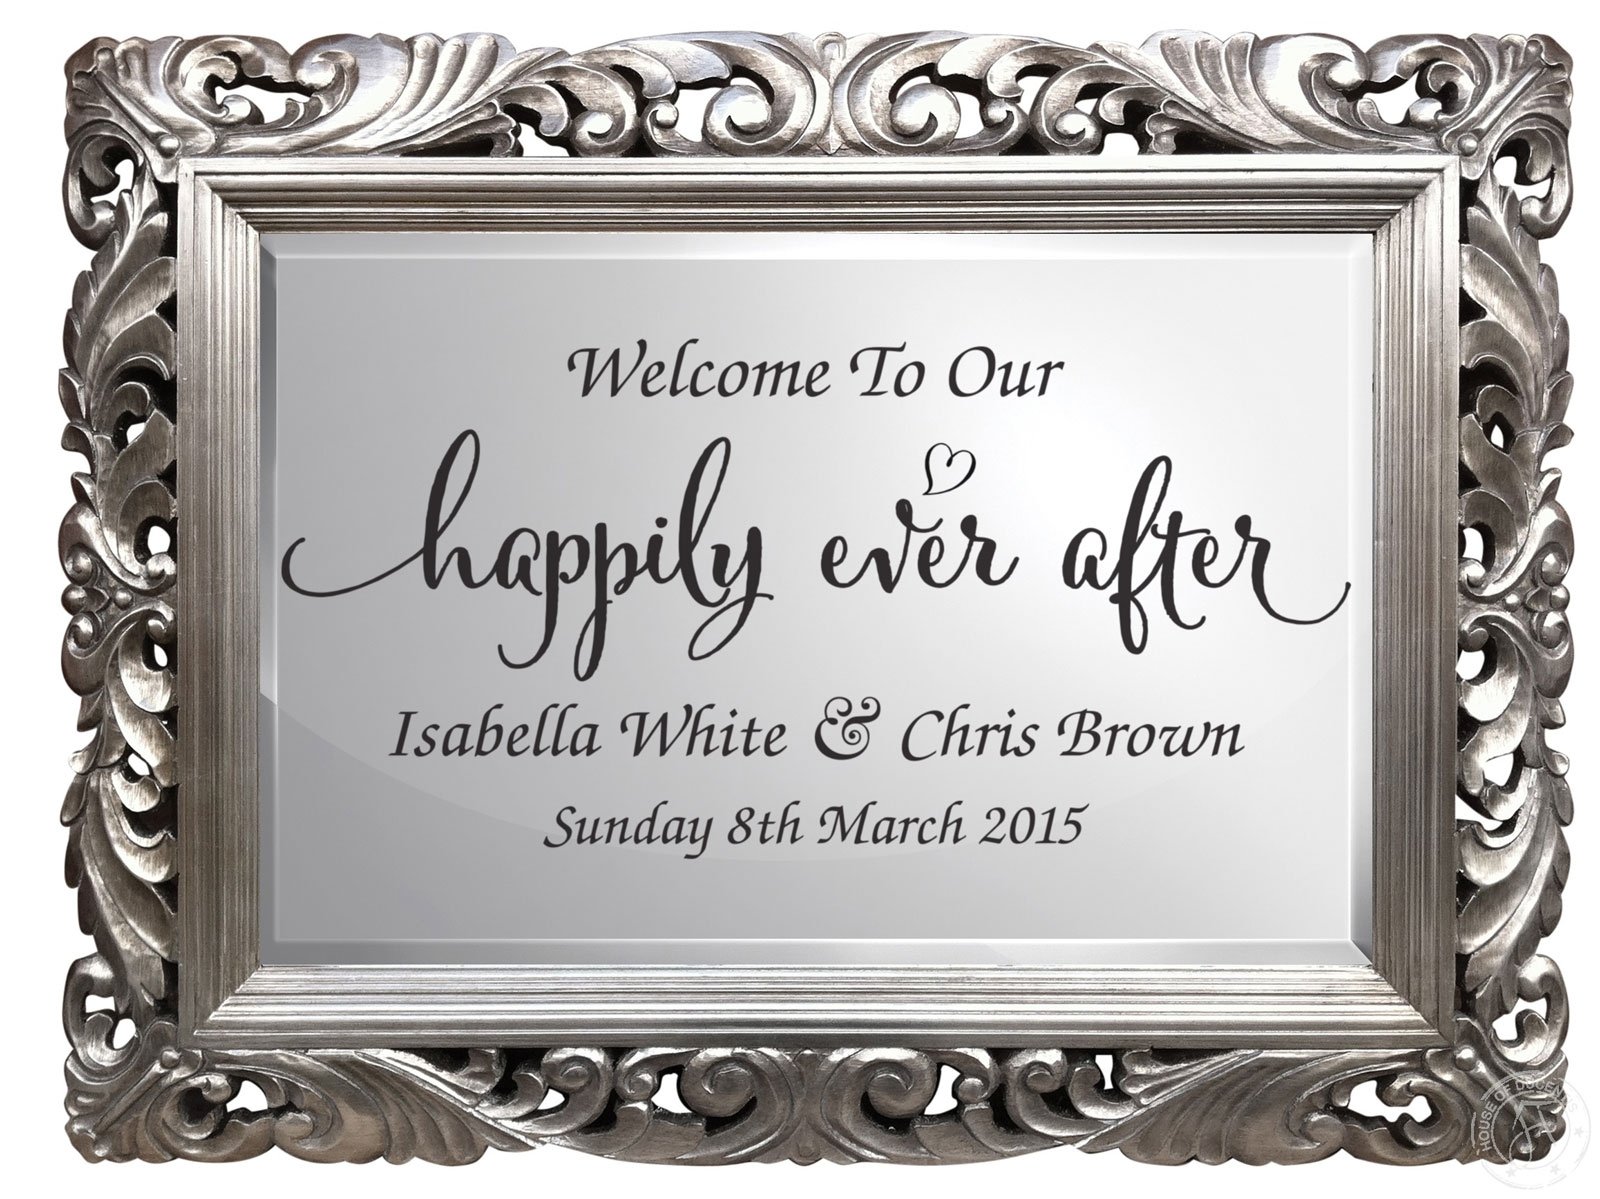 Fancy Border White Welcome To Our Wedding Metal Plaque Sign 